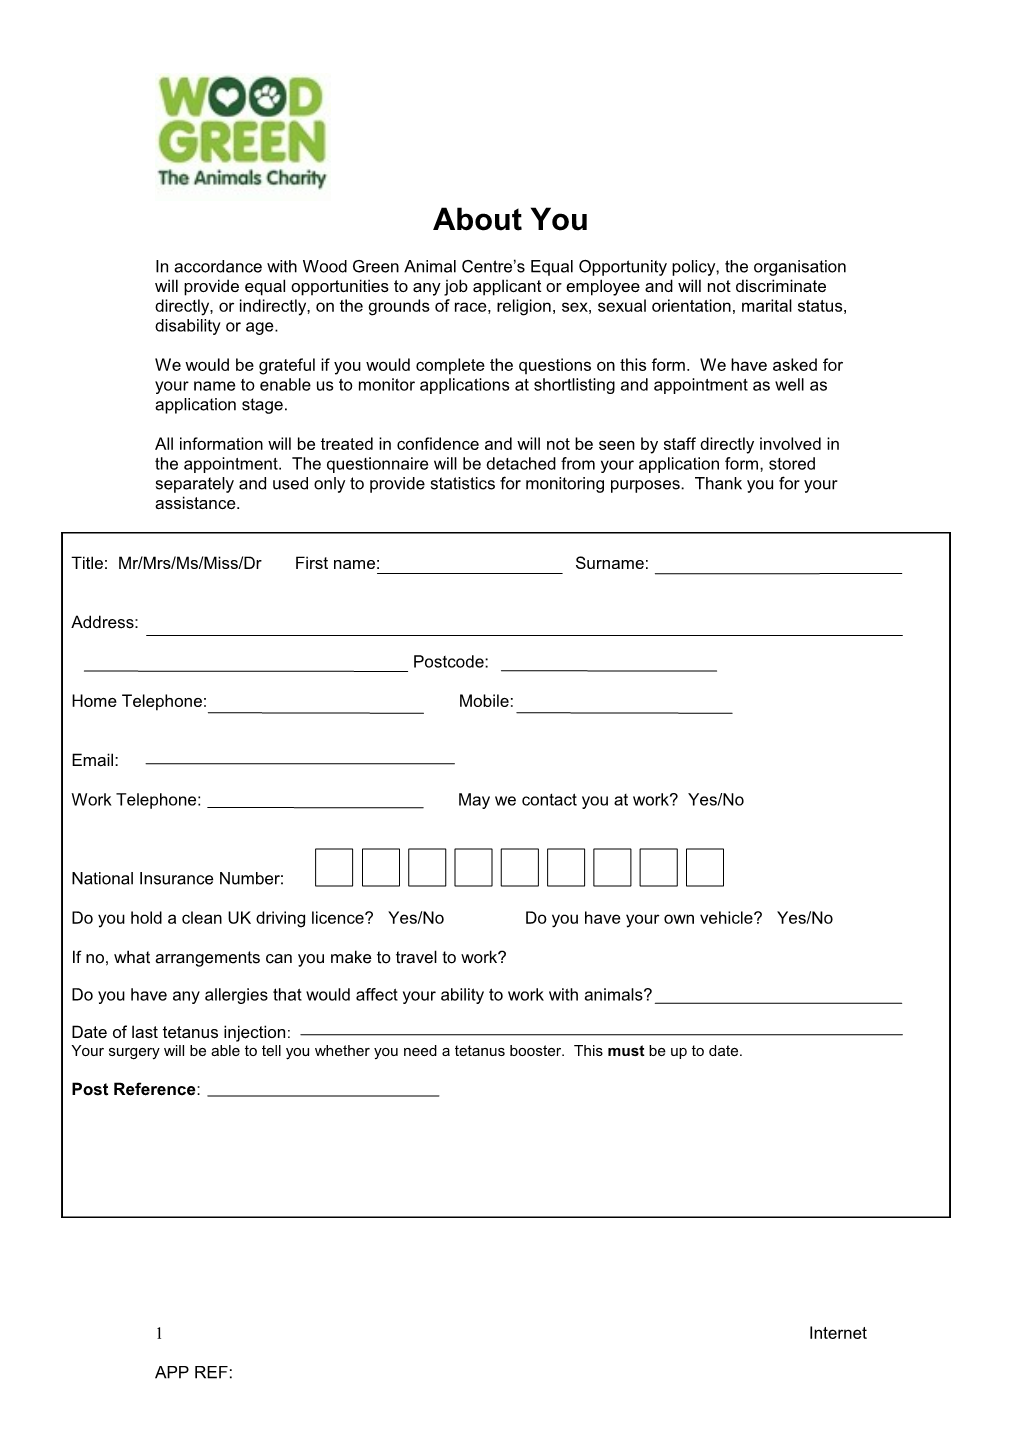 We Would Be Grateful If You Would Complete the Questions on This Form. We Have Asked For